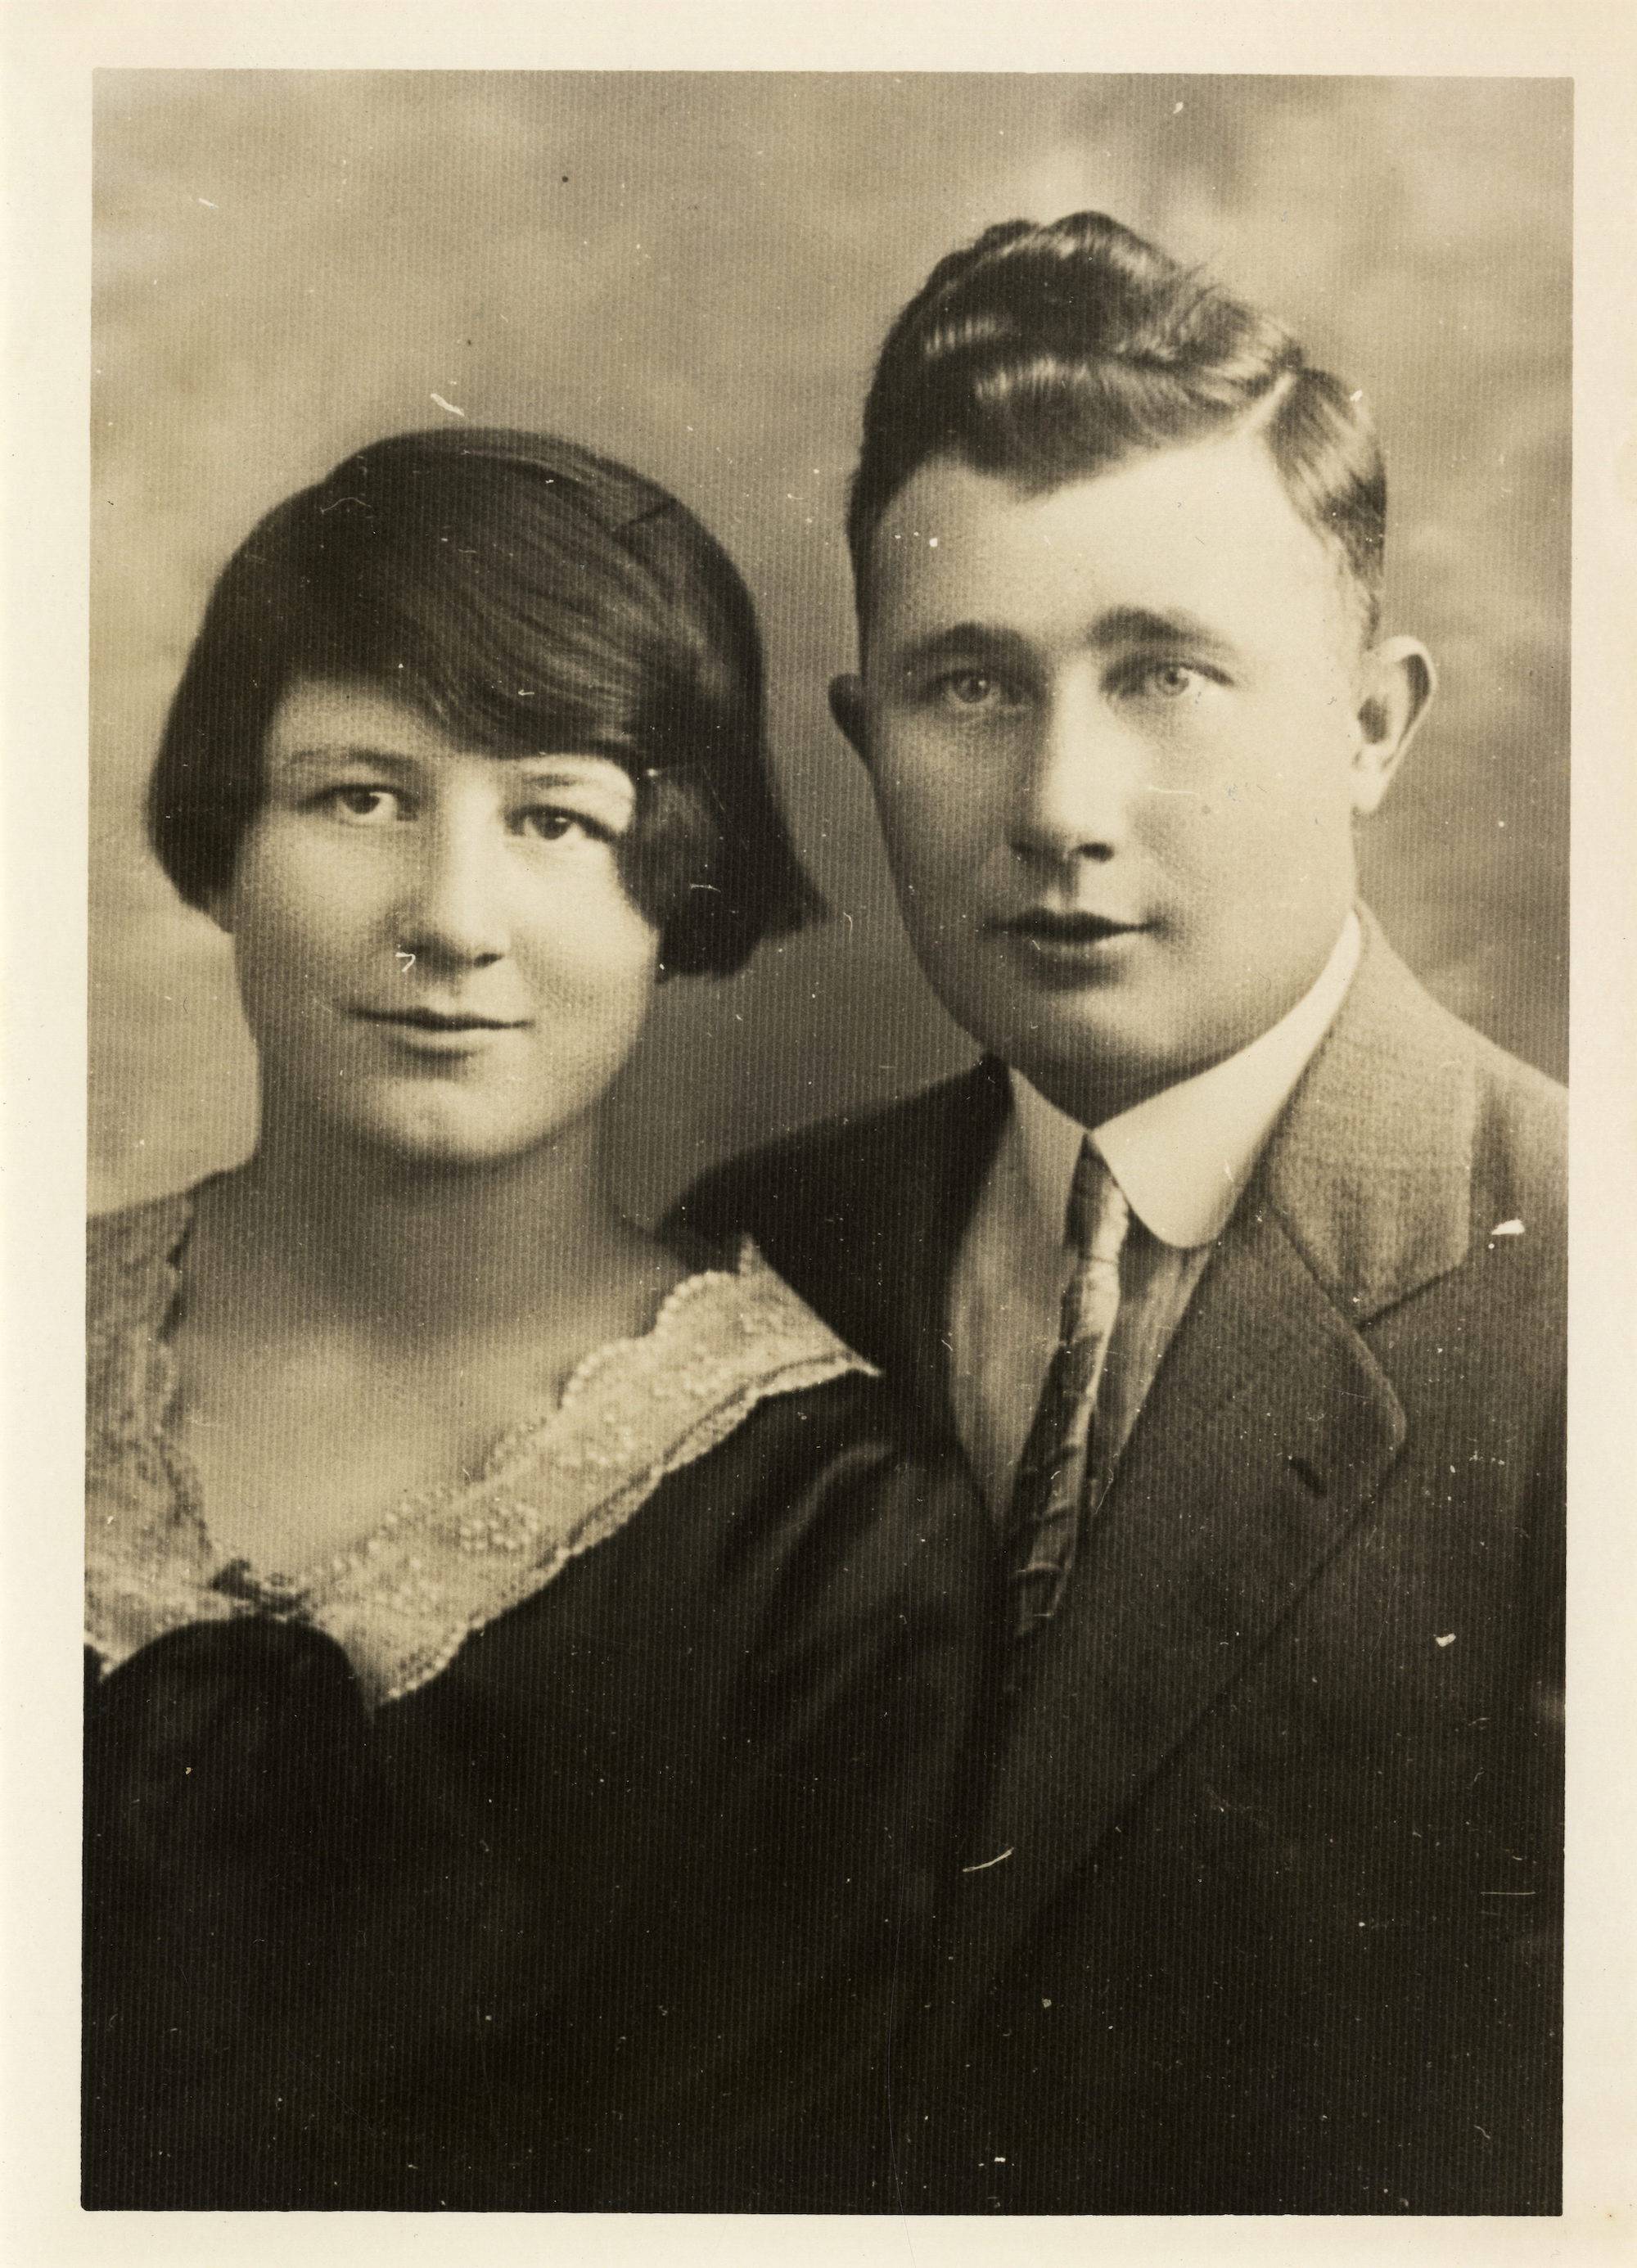 Nellie-Pheig Sayers and her brother Pats Guiheen. Taken in Springfield soon after Nellie's arrival in 1928. 